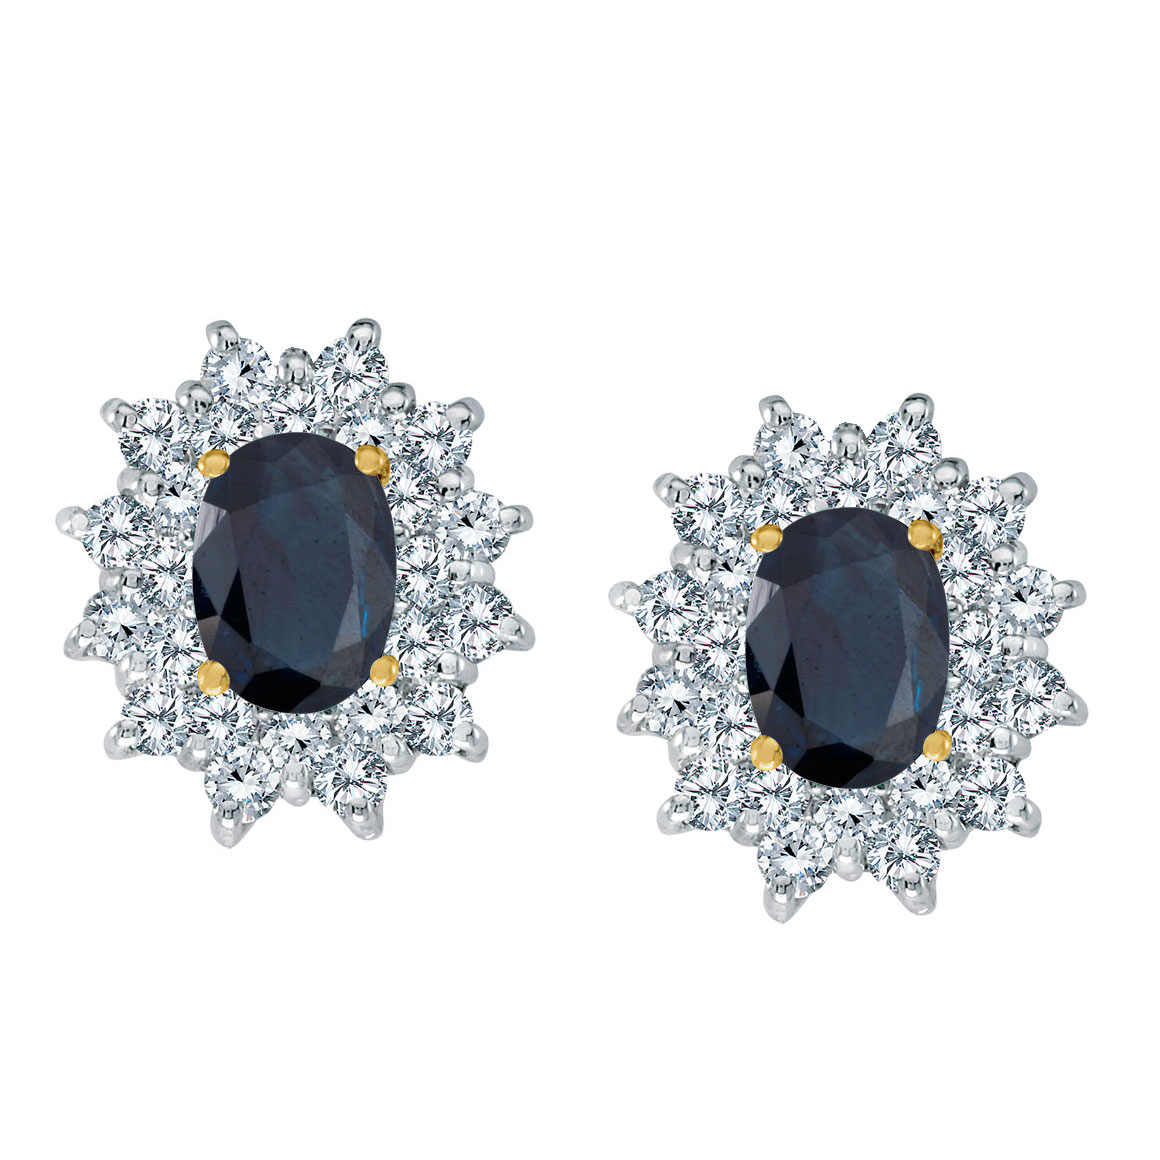 Bright 14k yellow gold earrings featuring 7x5 mm sapphires surrounded by 1.00 total carat of scin...